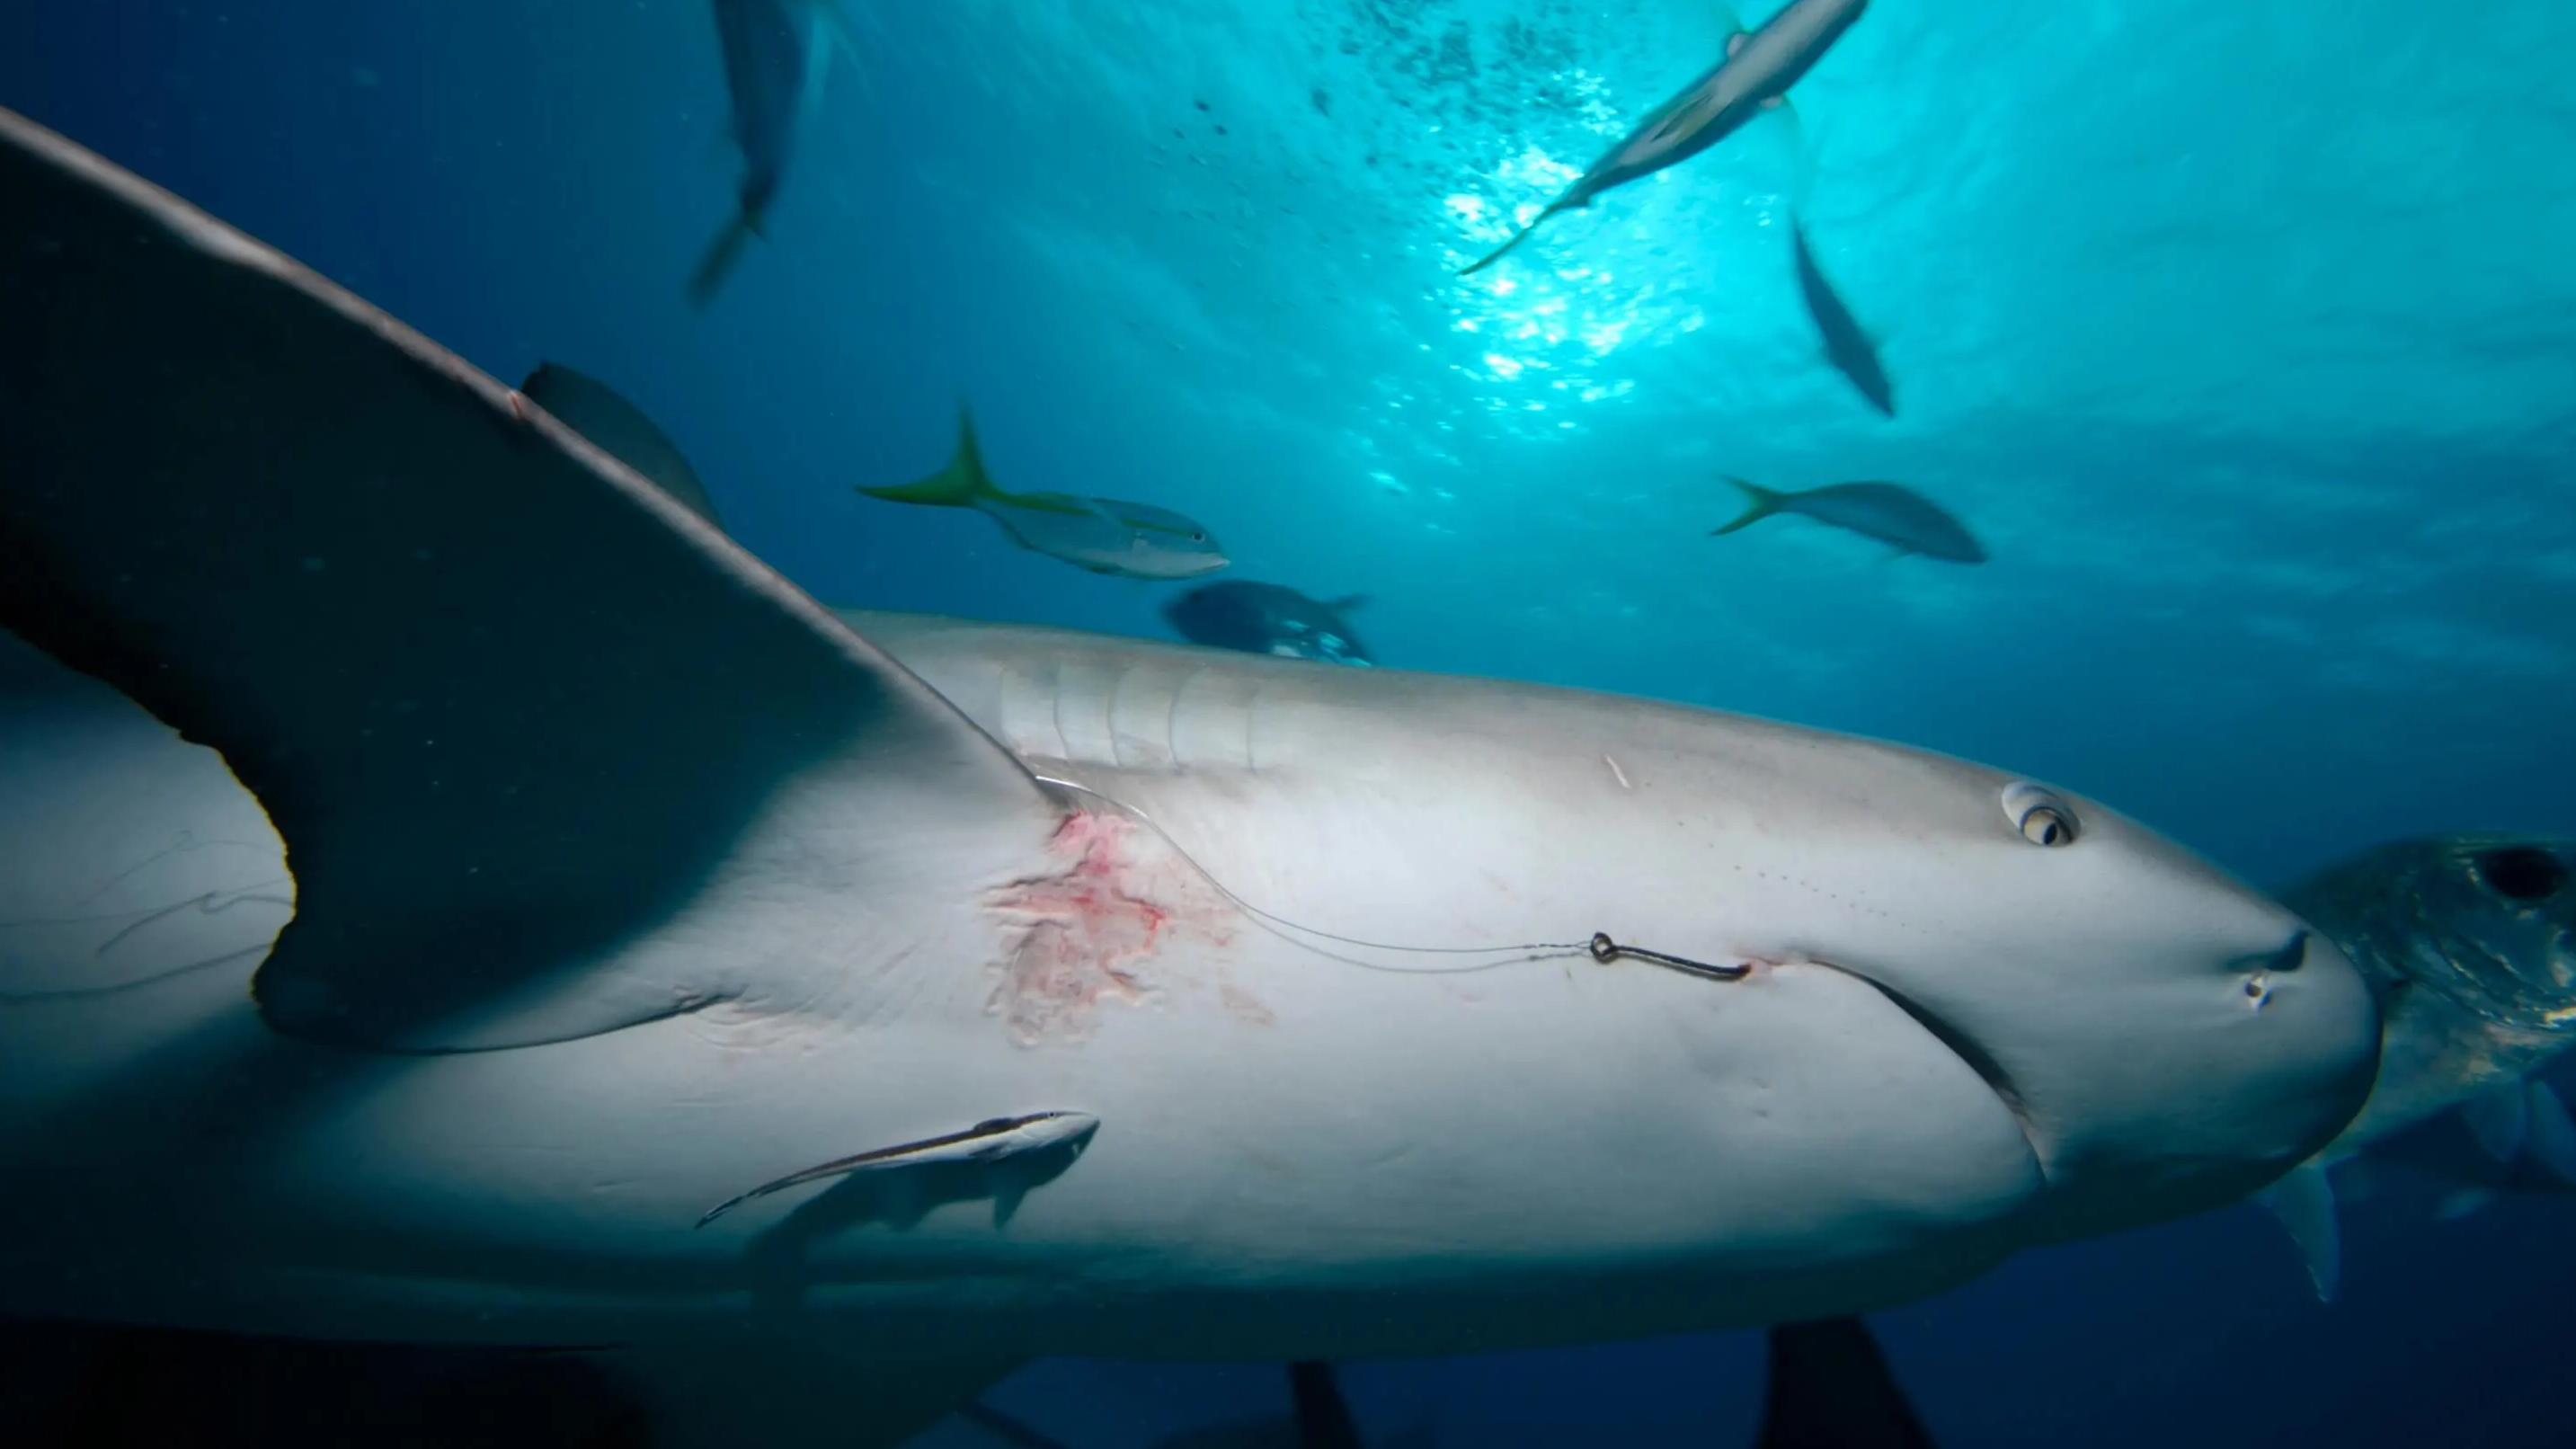 Meet the Shark Whisperer who sticks her hand in their mouths to